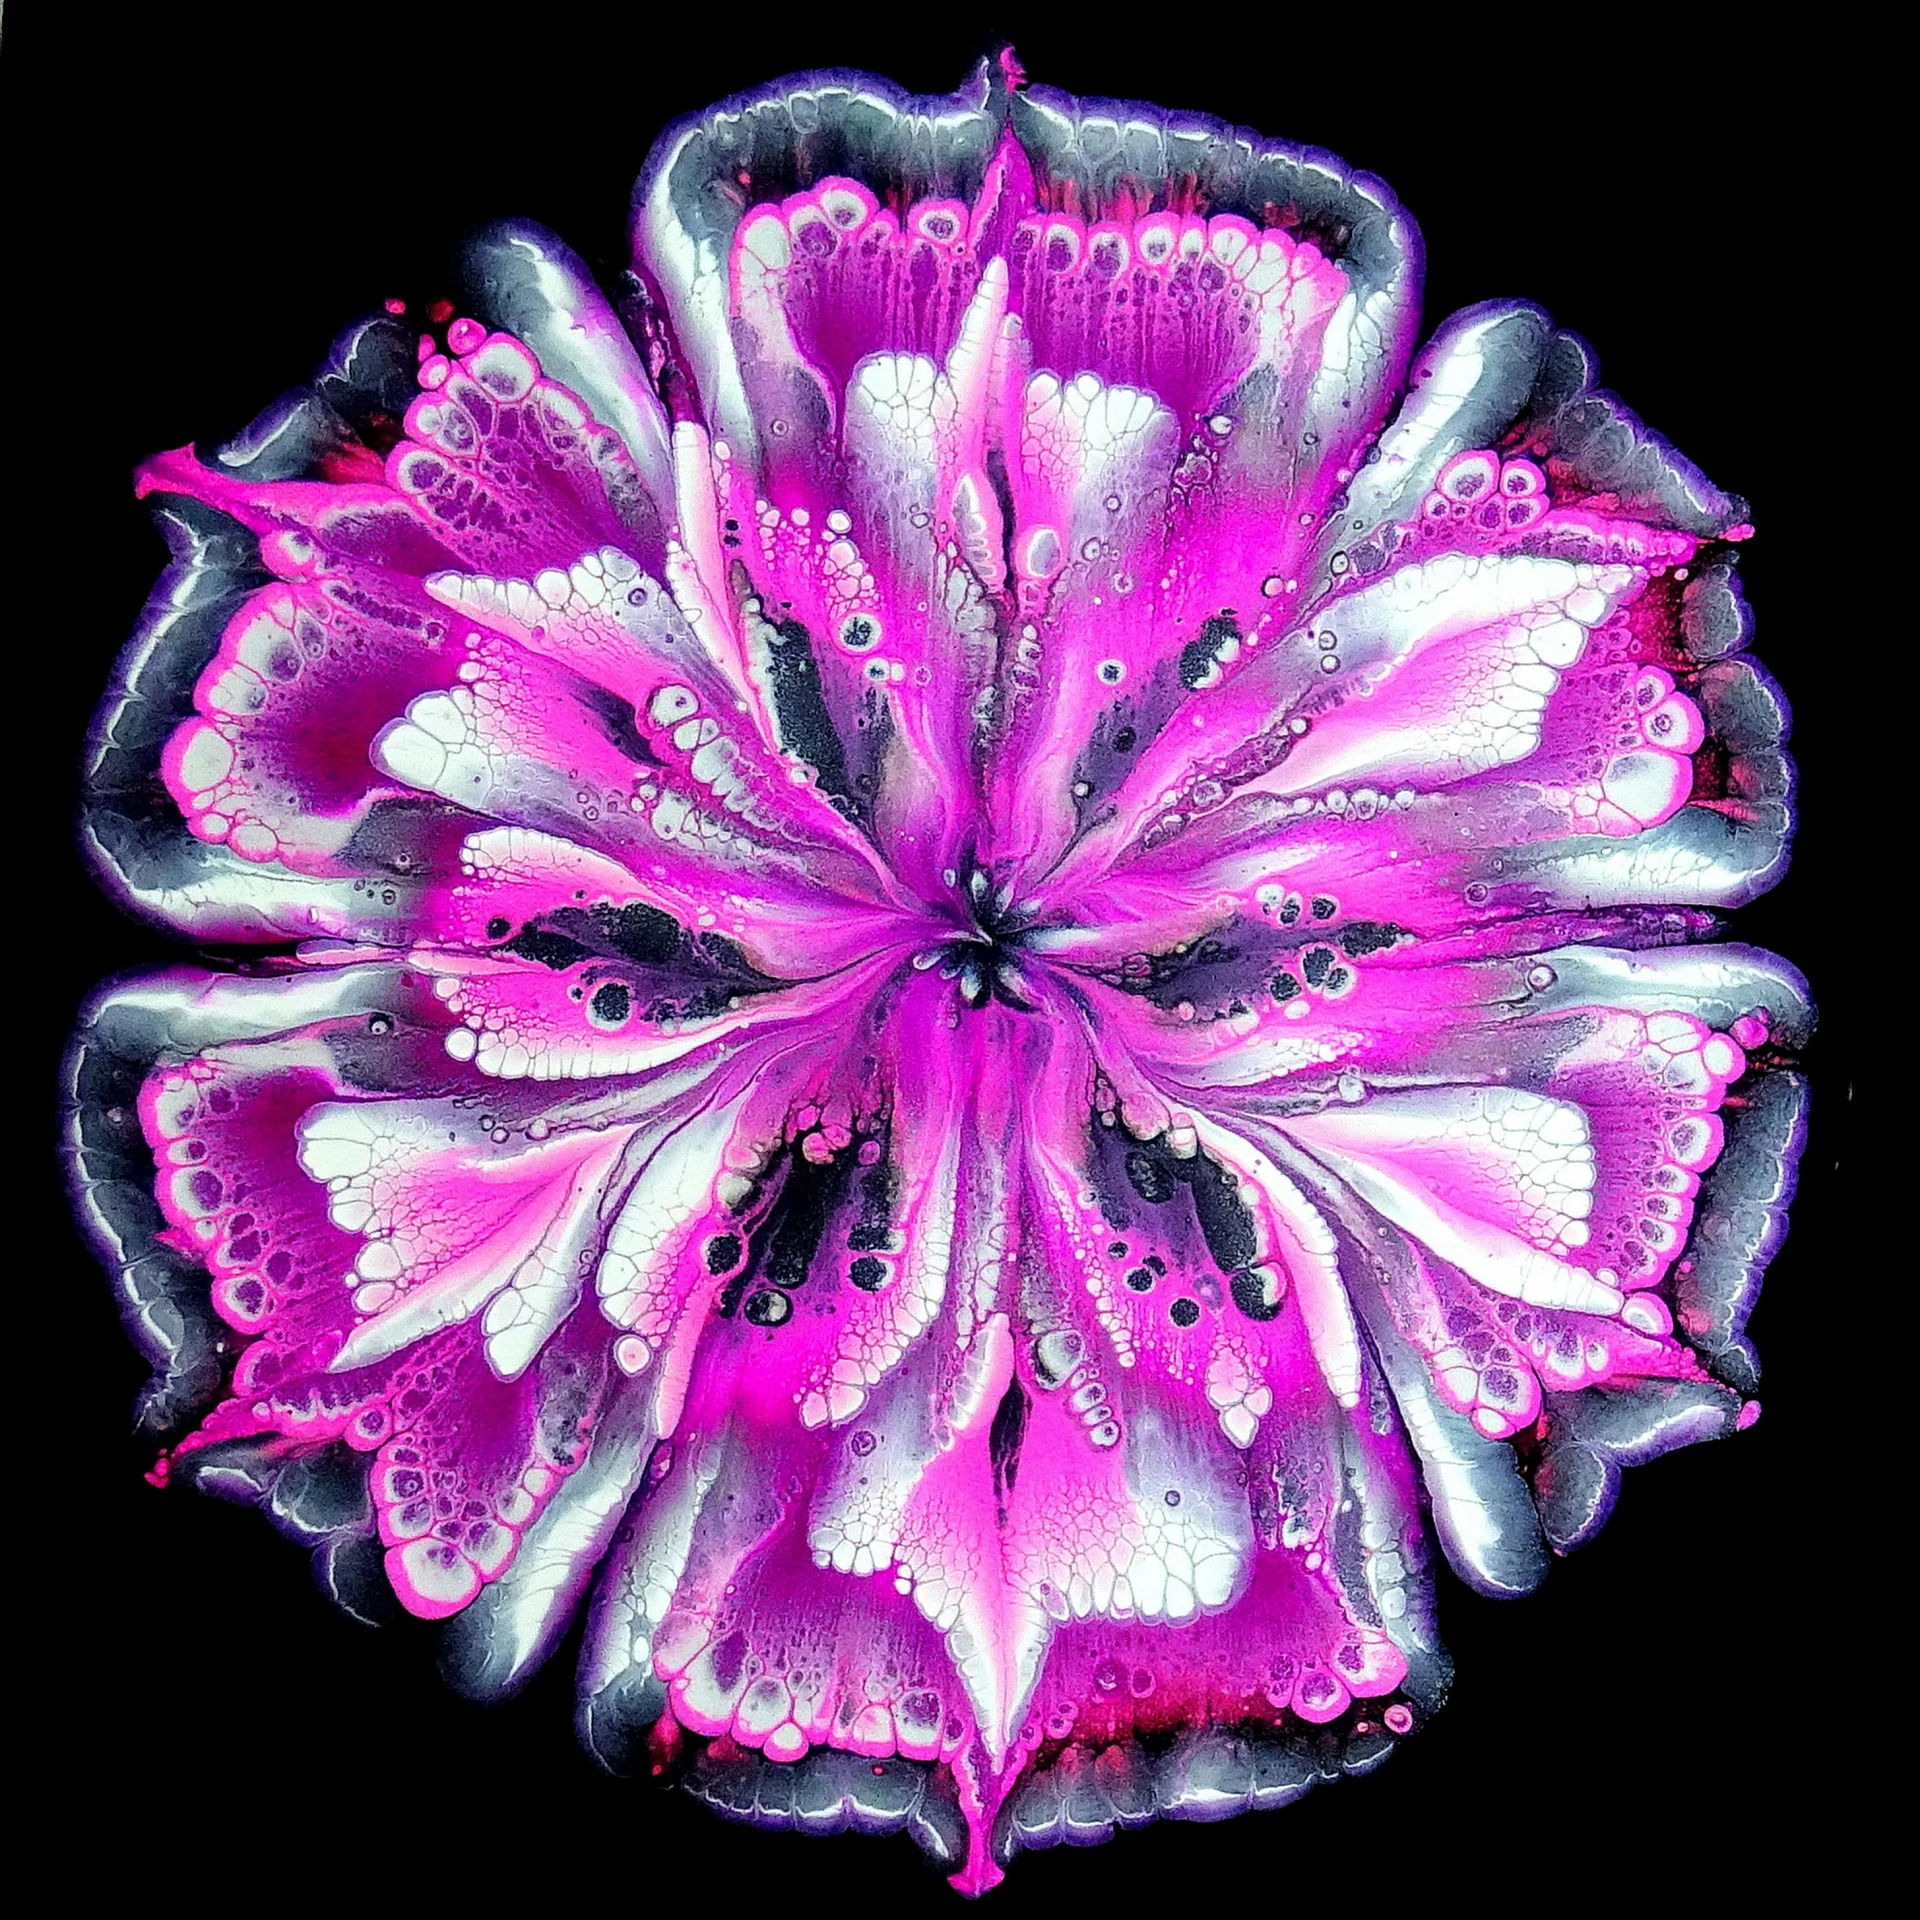 a close up of a flower on a black background, by Penny Patricia Poppycock, flickr, psychedelic art, pink and purple, drooling ferrofluid, carnation, symmetry!! concpet art